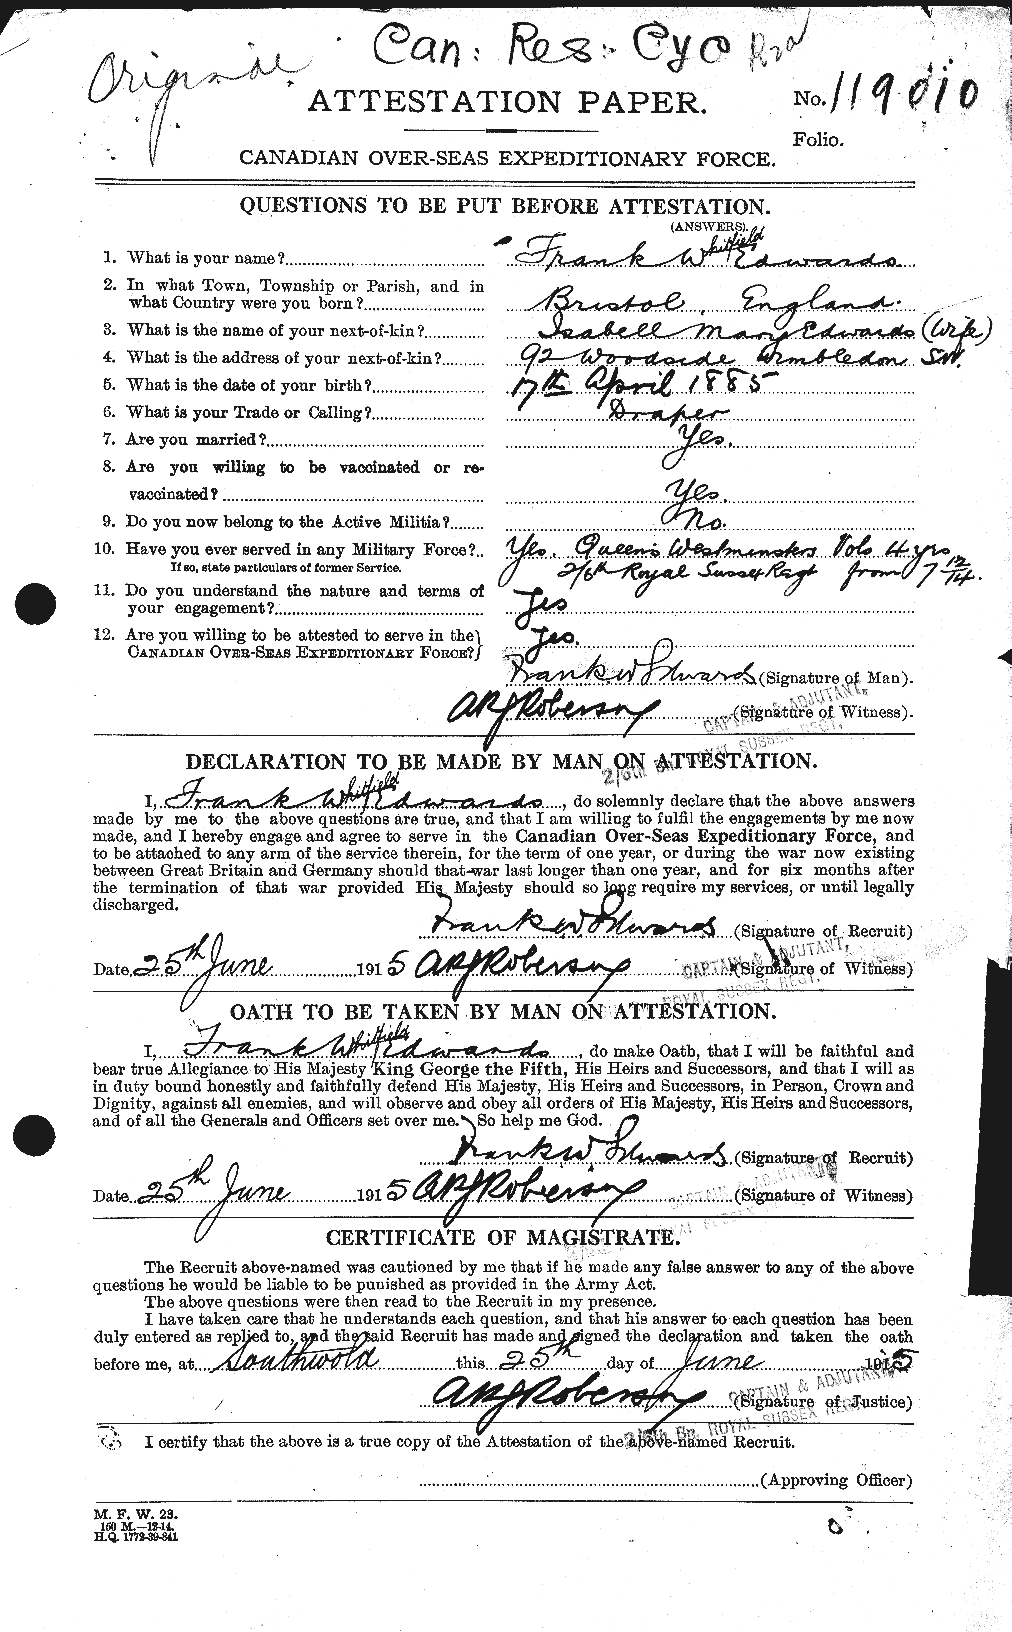 Personnel Records of the First World War - CEF 309058a